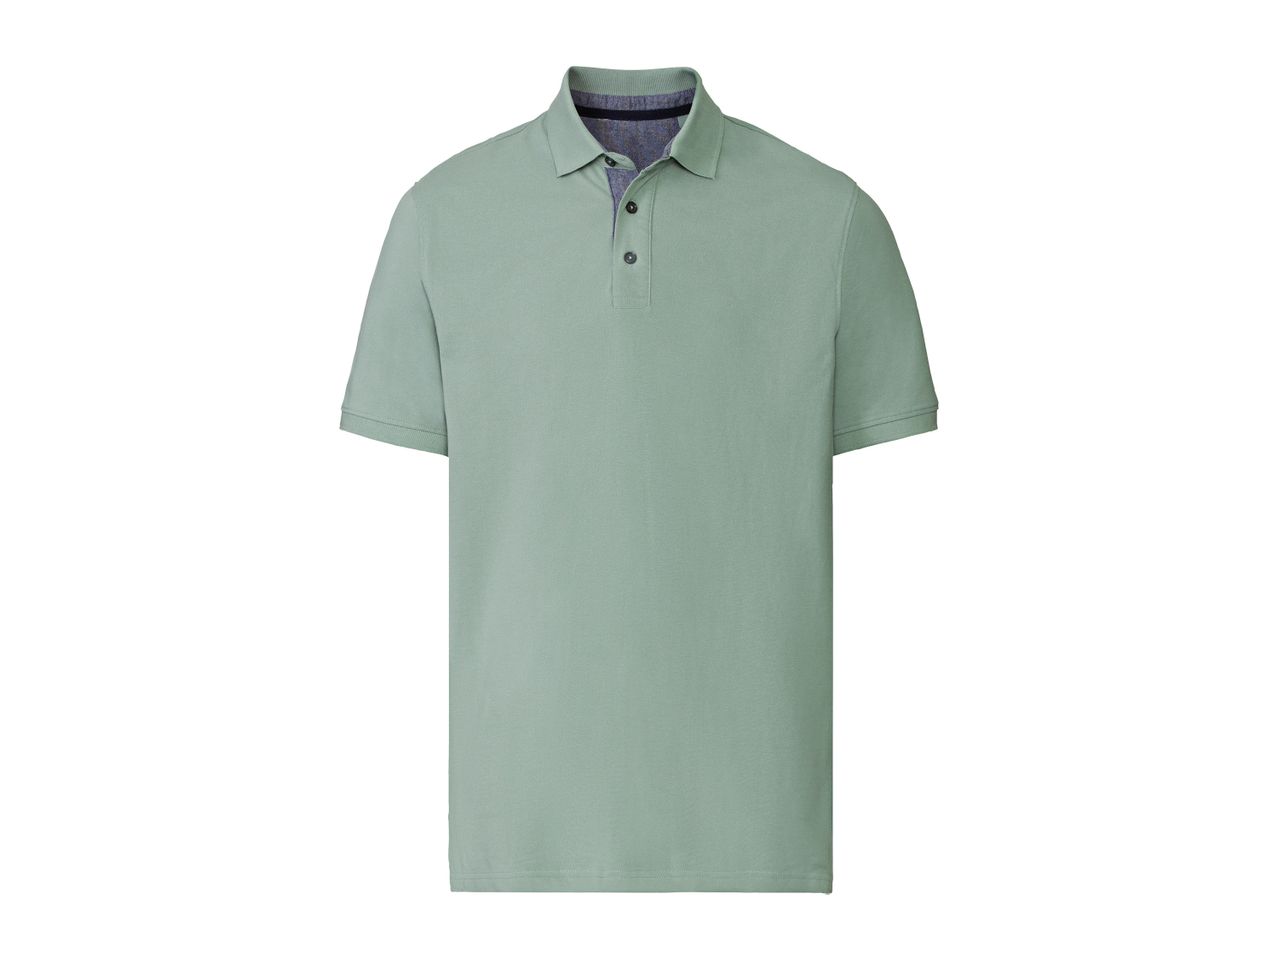 Go to full screen view: Men’s Polo Shirt - Image 5